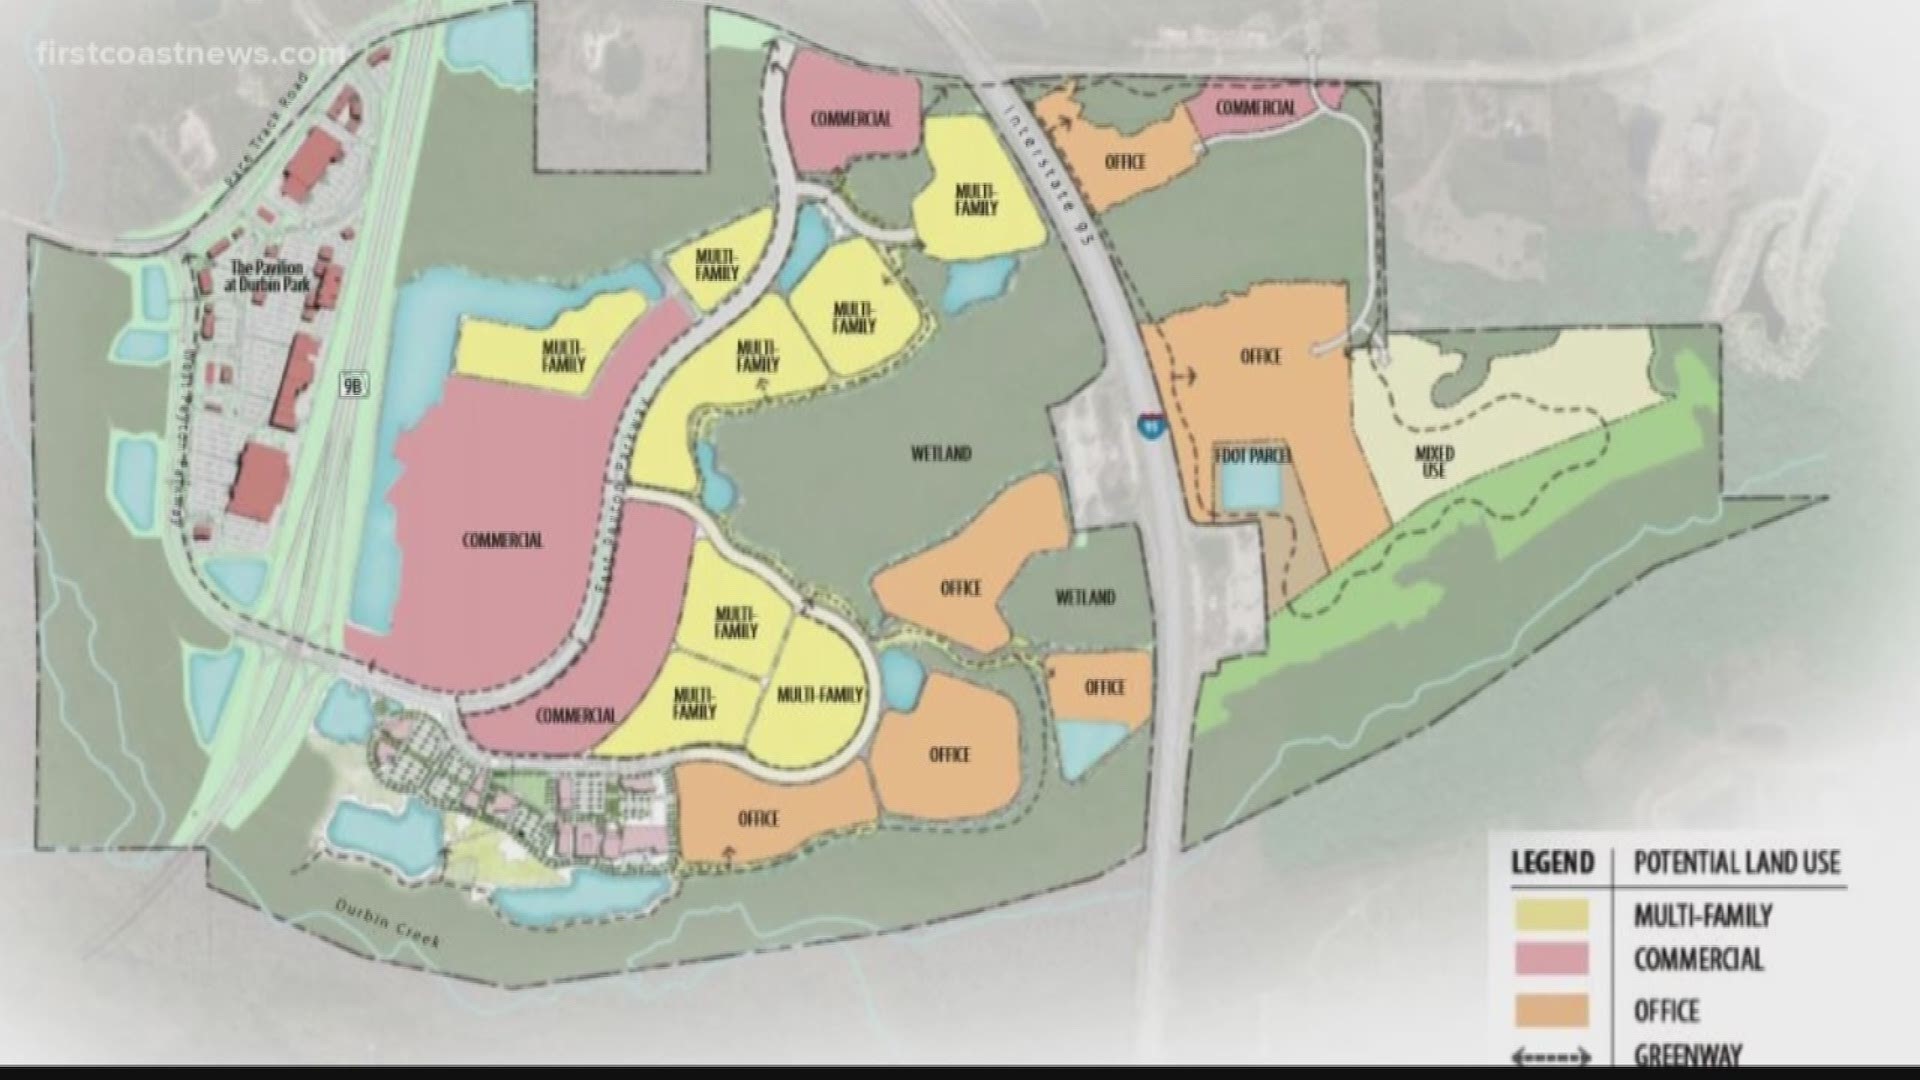 Phase two would bring in a Bass Pro Shops along with other commercial and retail spaces.